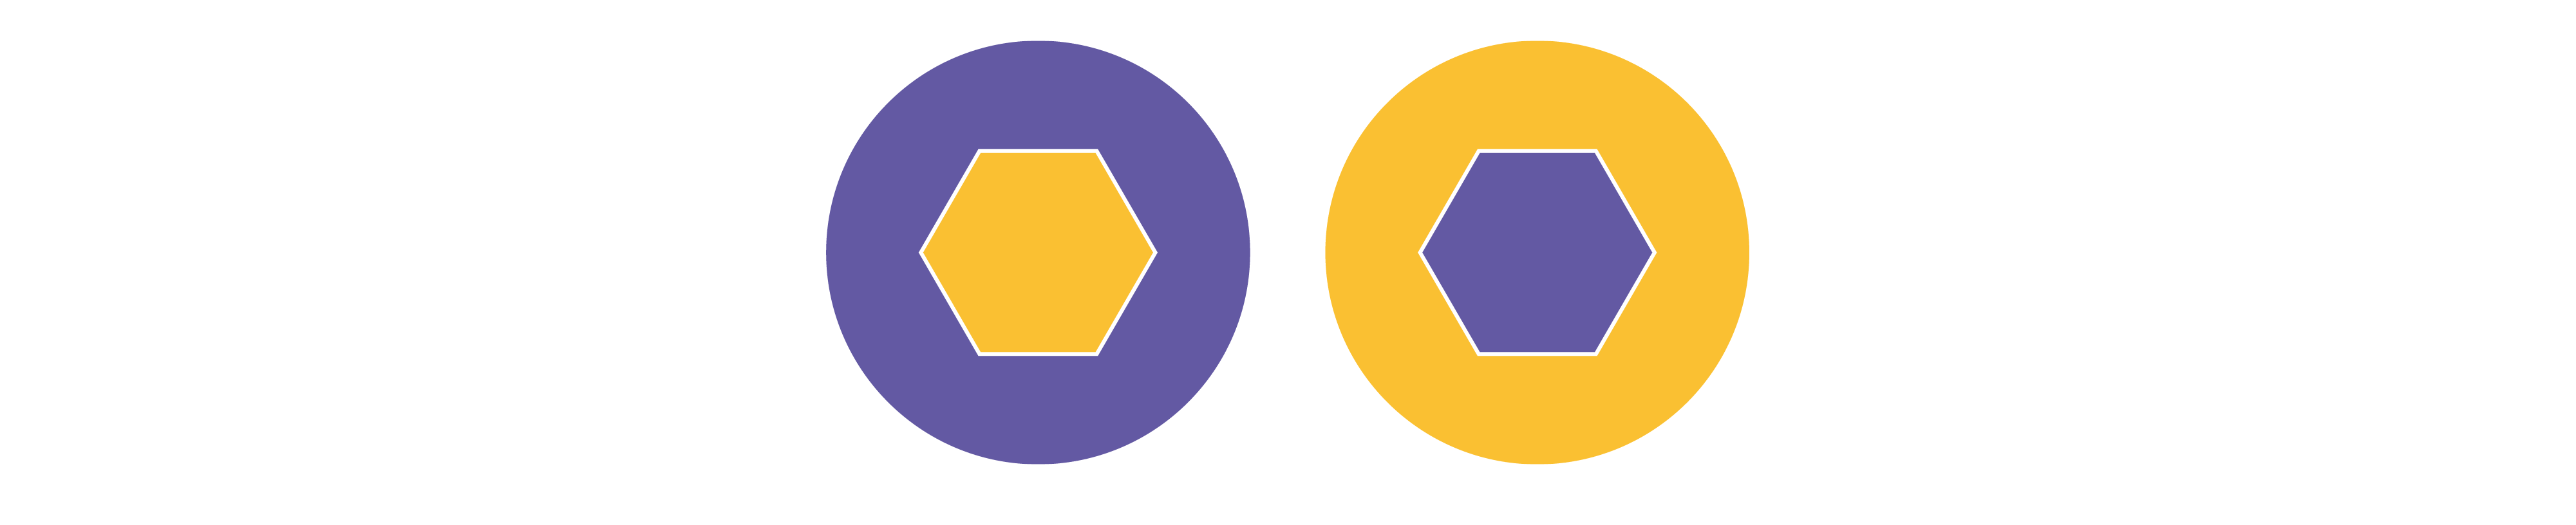 On the left is a purple circle with a yellow hexagon in the middle. On the right is a yellow circle with a purple hexagon in the middle. Both hexagons are the same size, but the yellow one looks larger than the purple one.